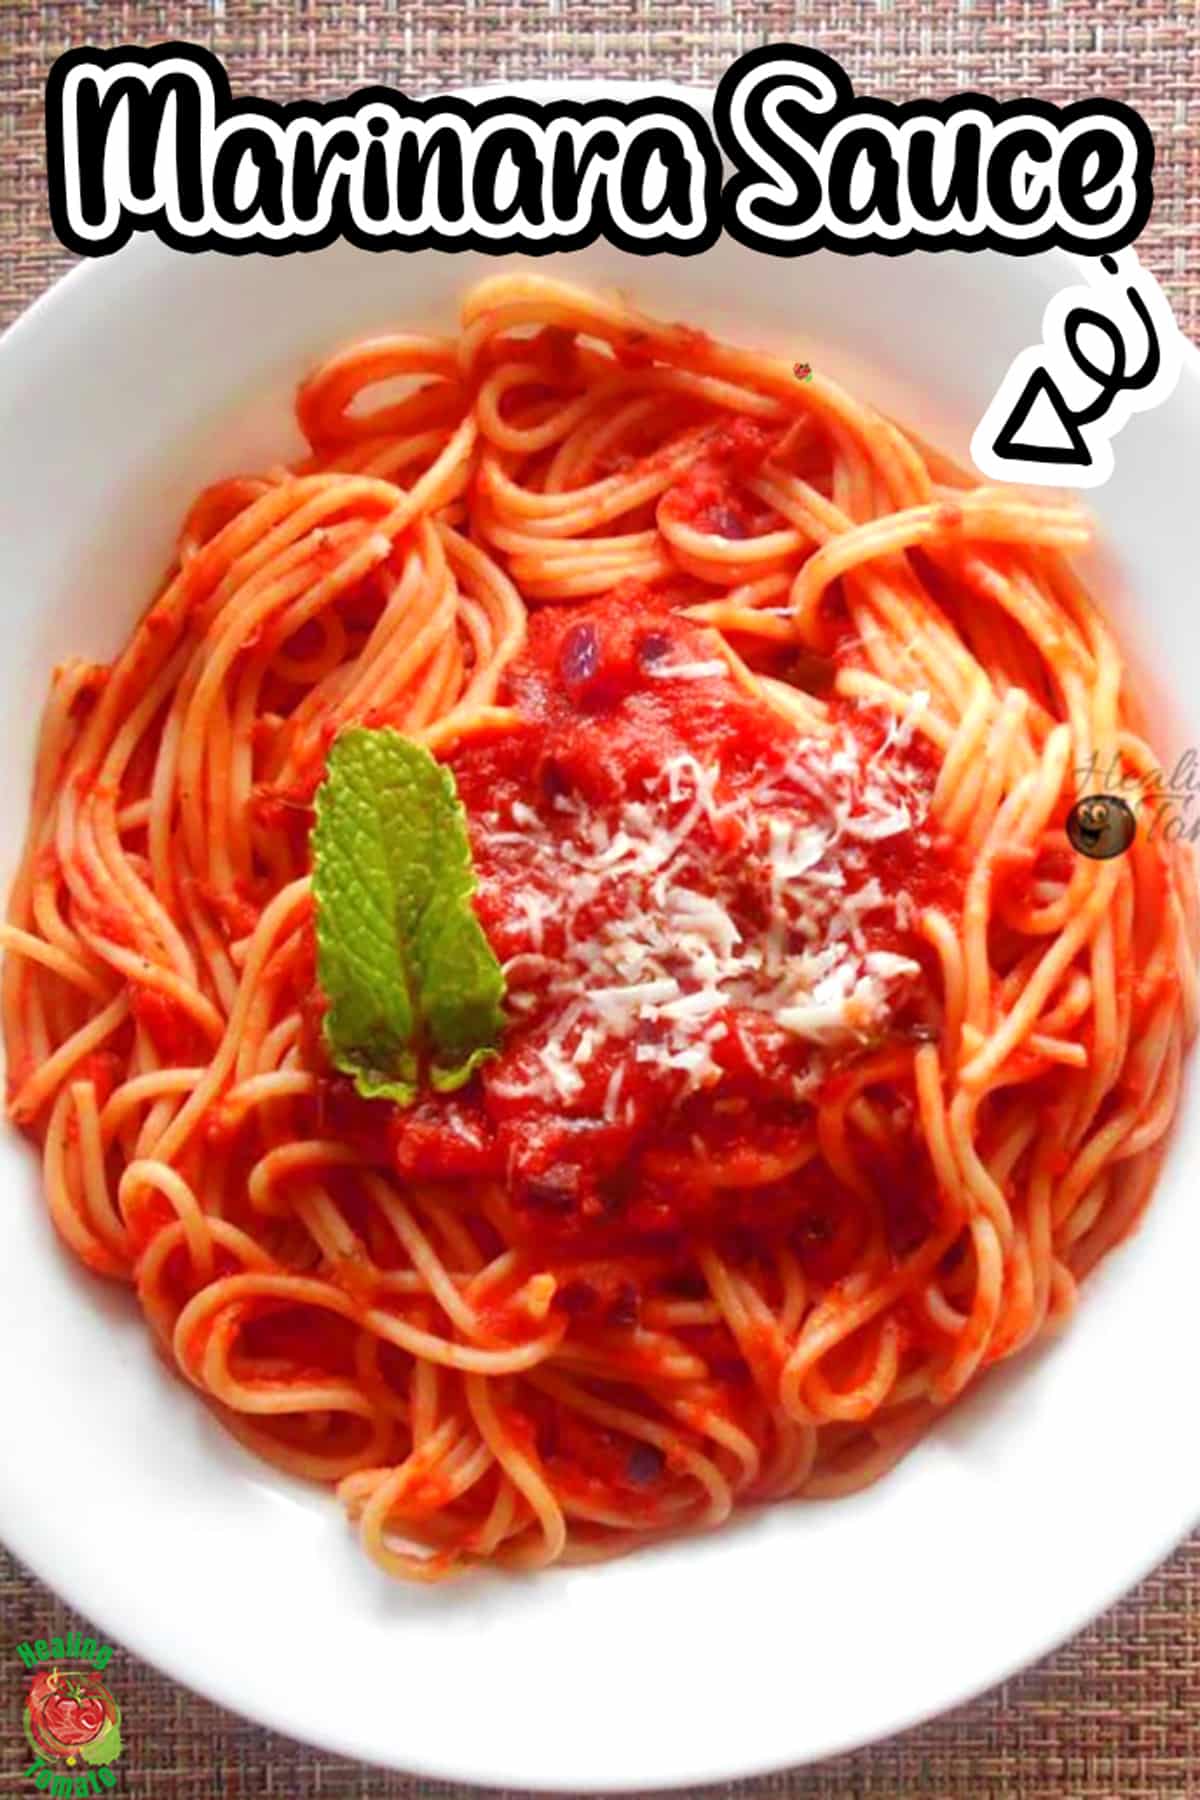 Top view of a white plate filled with spaghetti and campari tomato sauce recipe